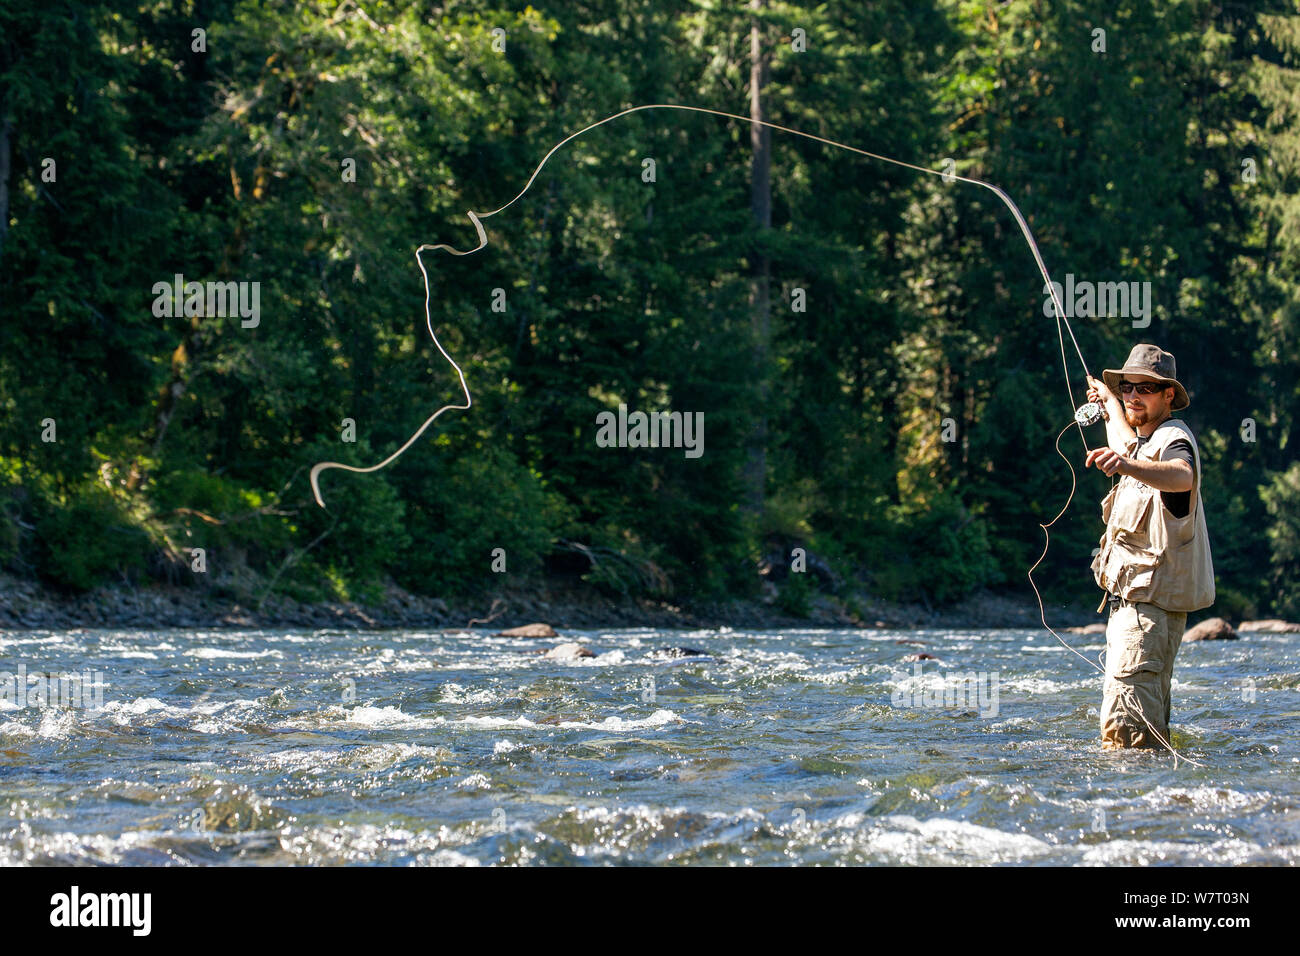 Man fly fishing on the Middle Fork of the Snoqualme River near North Bend, Washington, USA, July 2013. Model released. Stock Photo